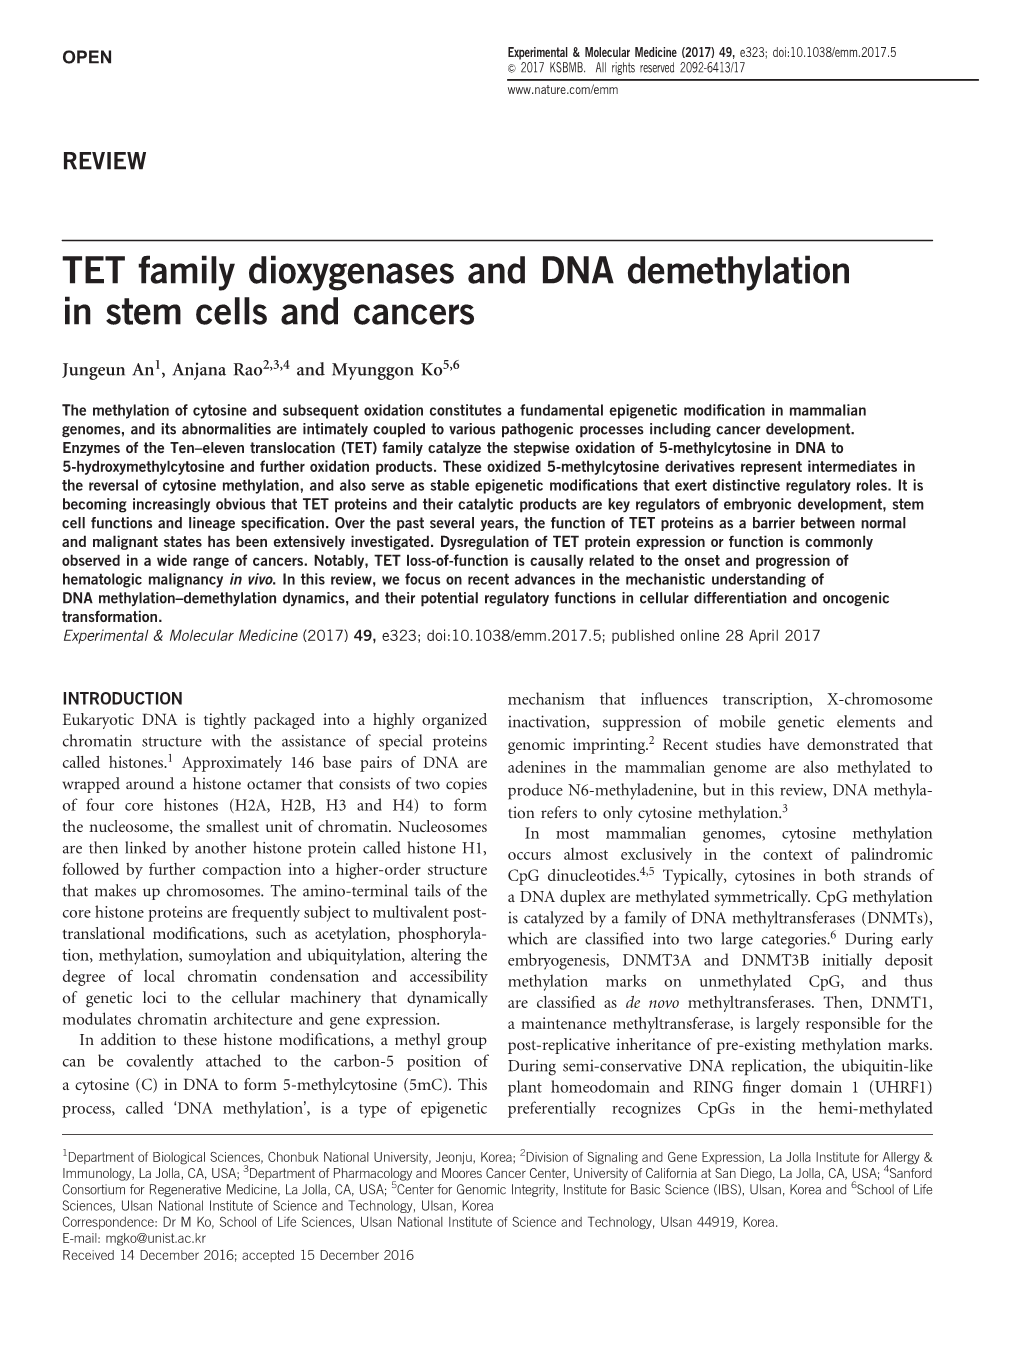 TET Family Dioxygenases and DNA Demethylation in Stem Cells and Cancers